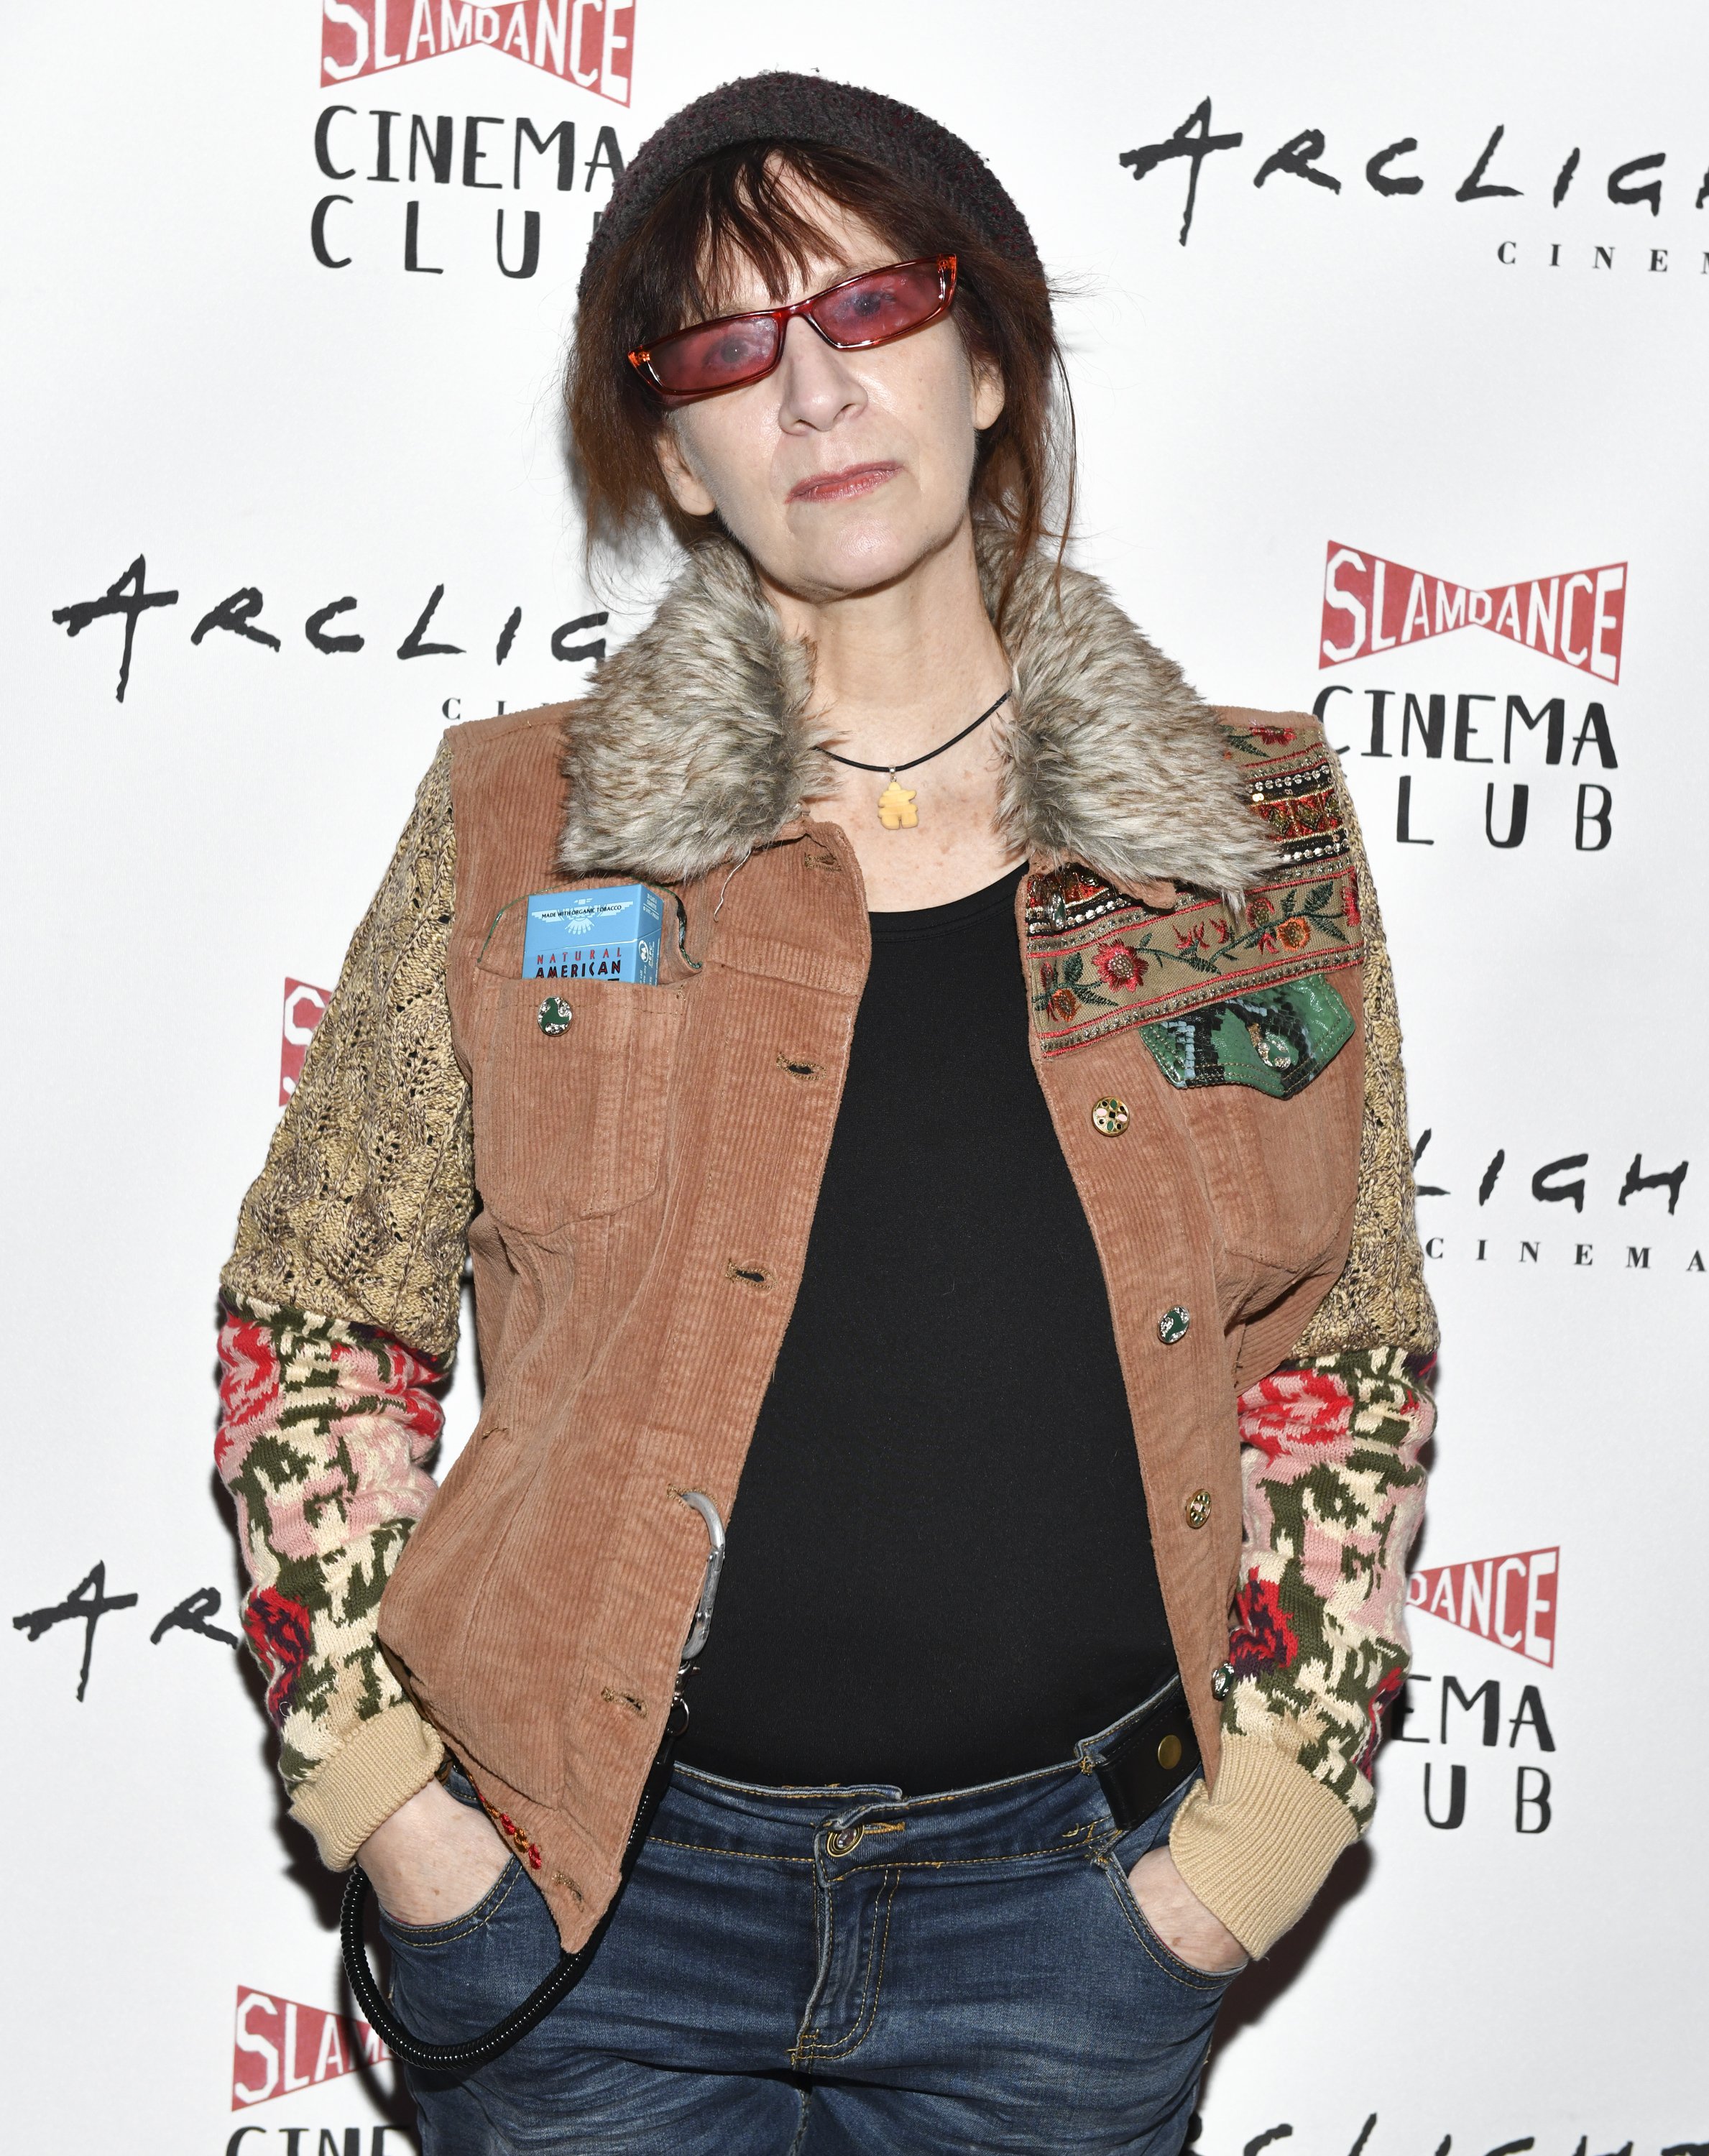 Amanda Plummer poses for a photo at the Slamdance Cinema Club Screening of "Spiral Farm" at ArcLight Hollywood on February 12, 2019, in Hollywood, California | Source: Getty Images